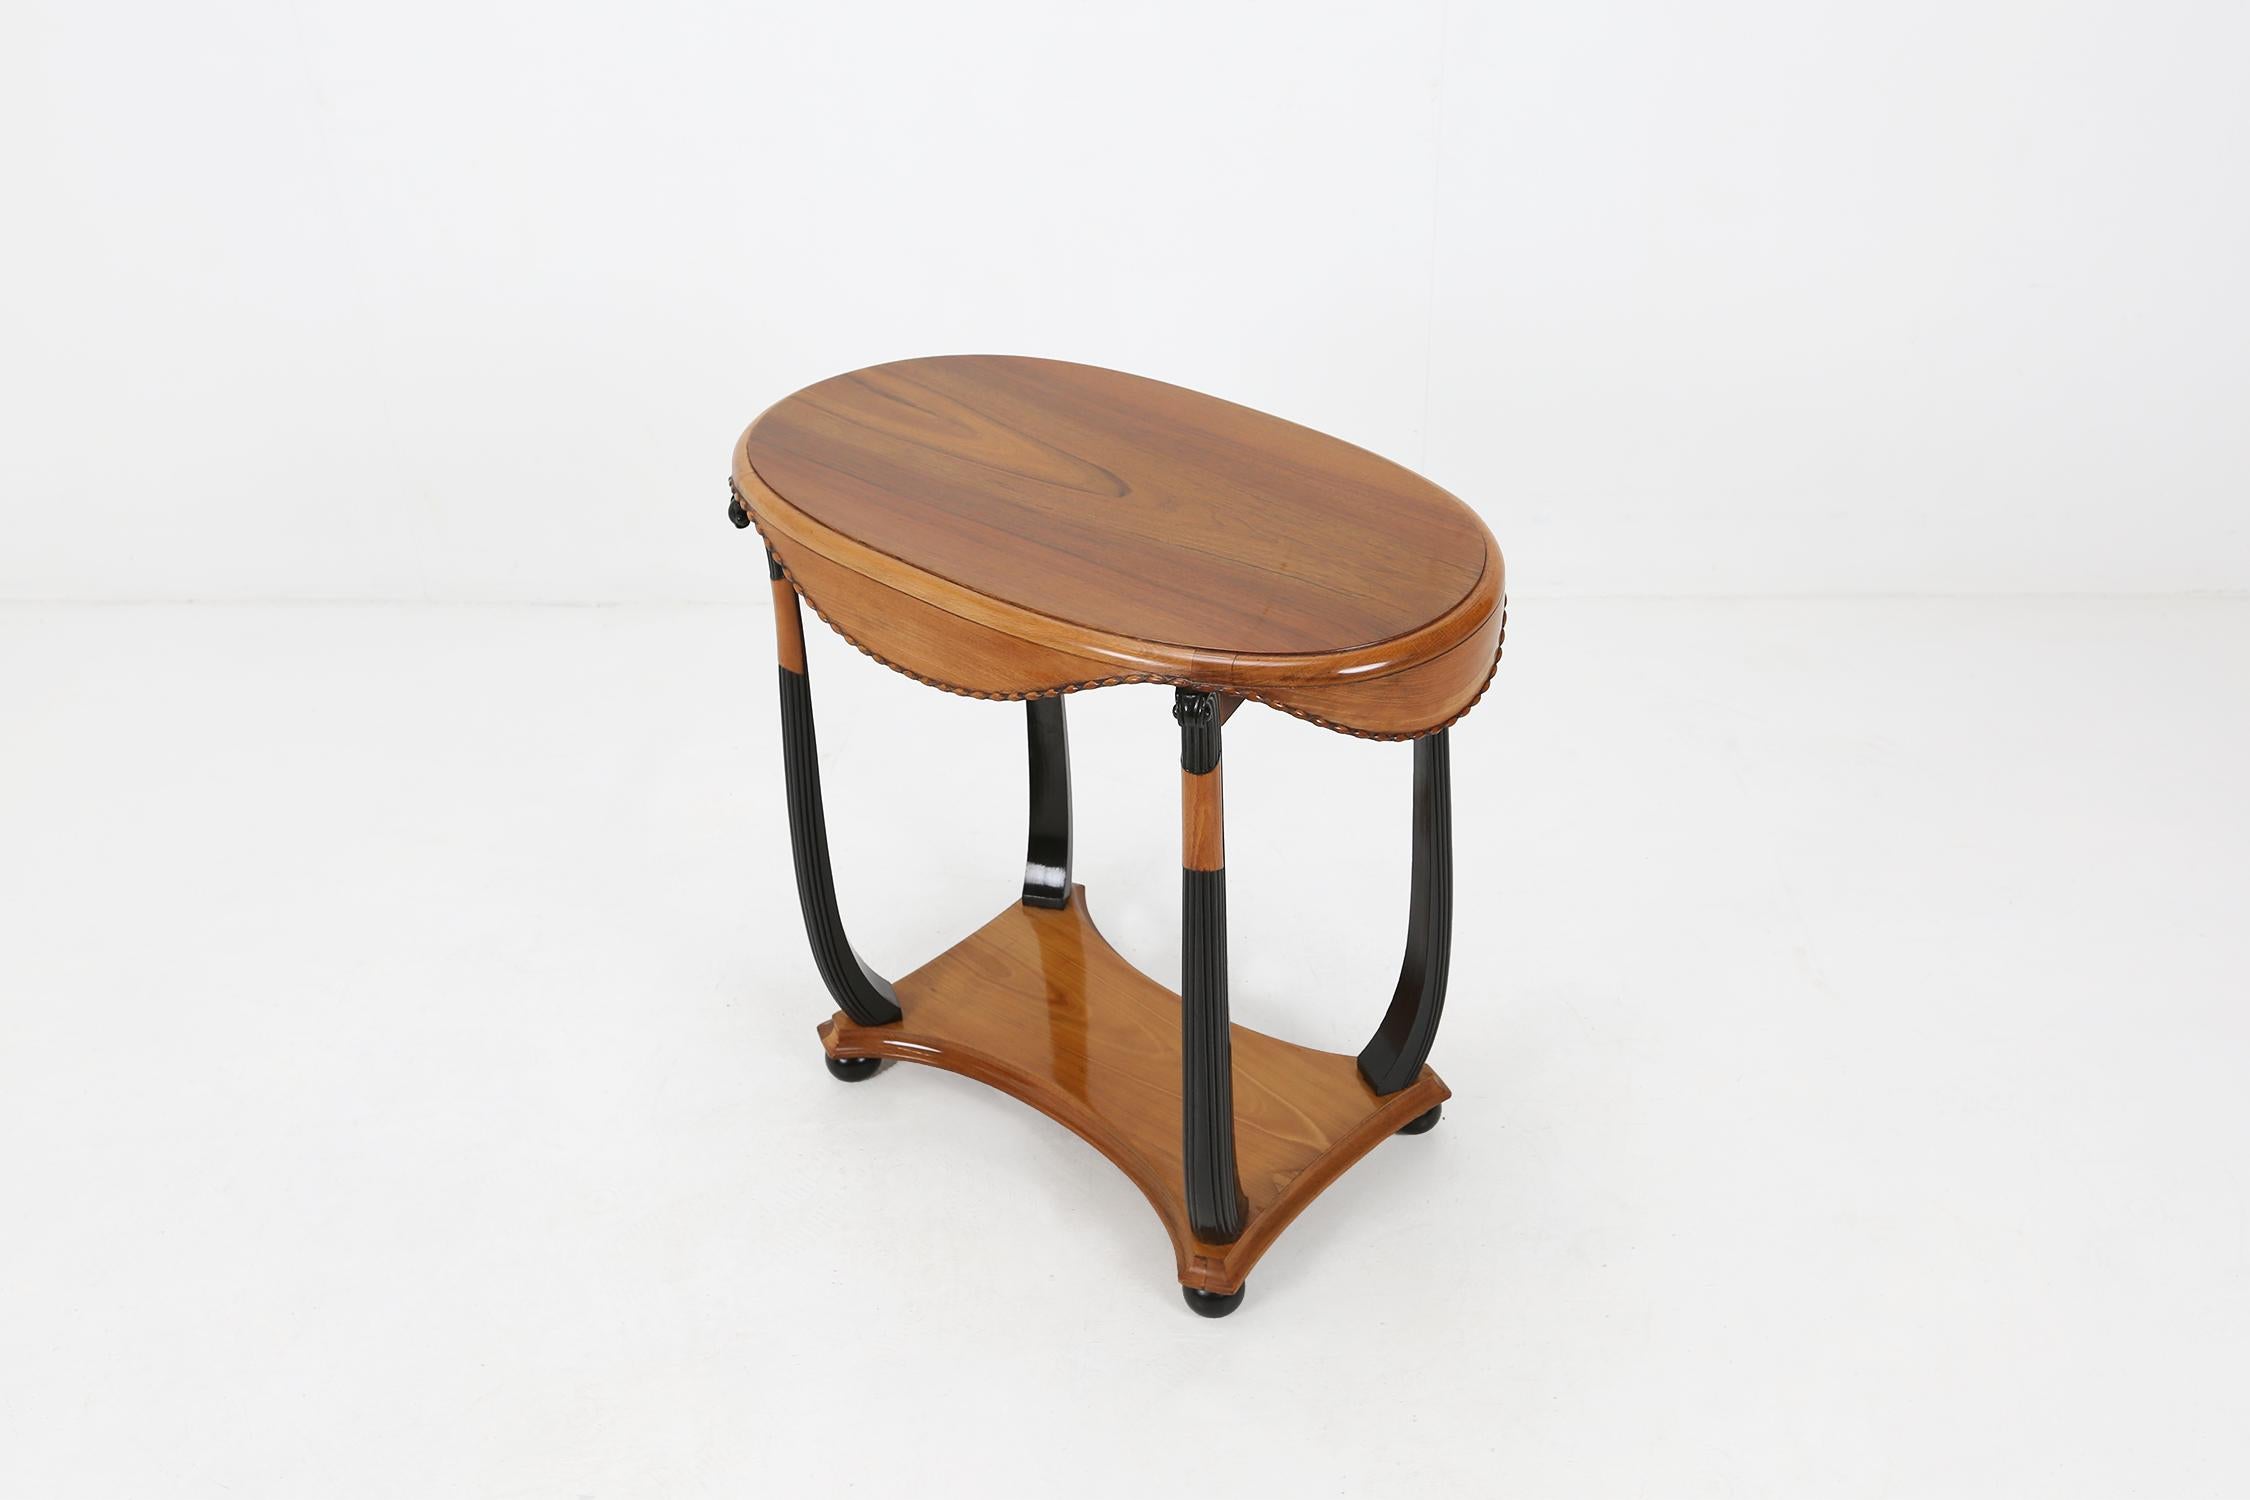 Early 20th Century Side Table by Paul Follot 1925